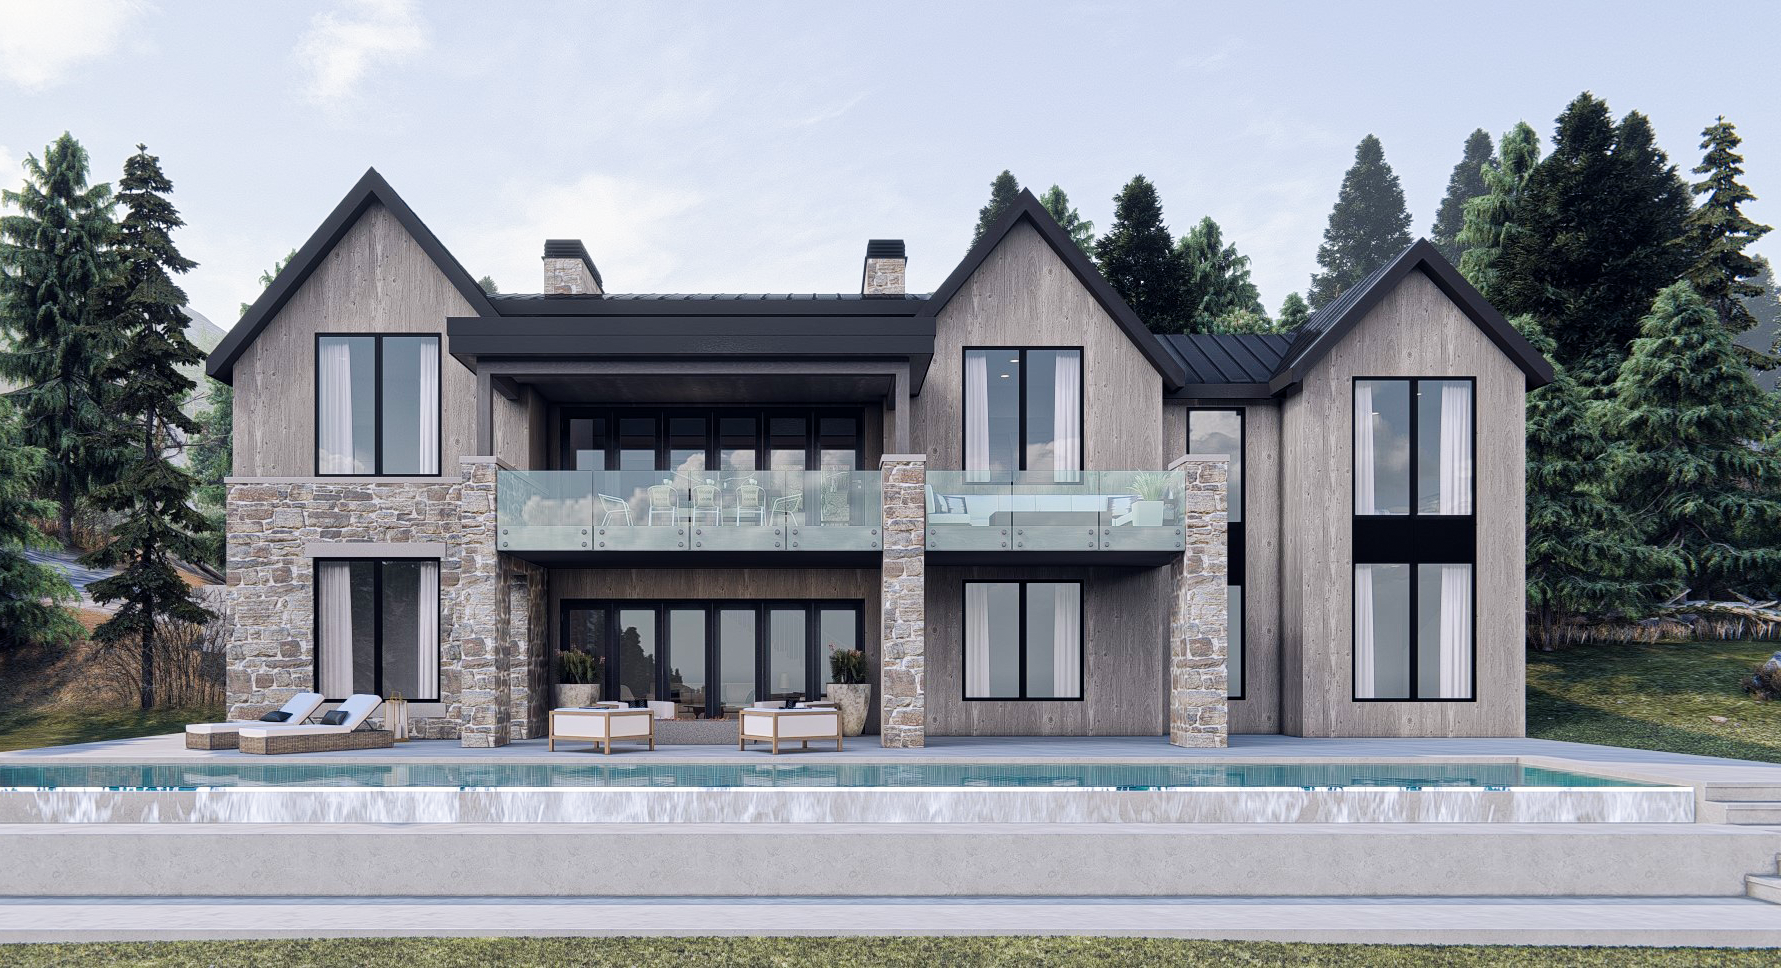 The back of the home features a infinity pool and second floor balcony